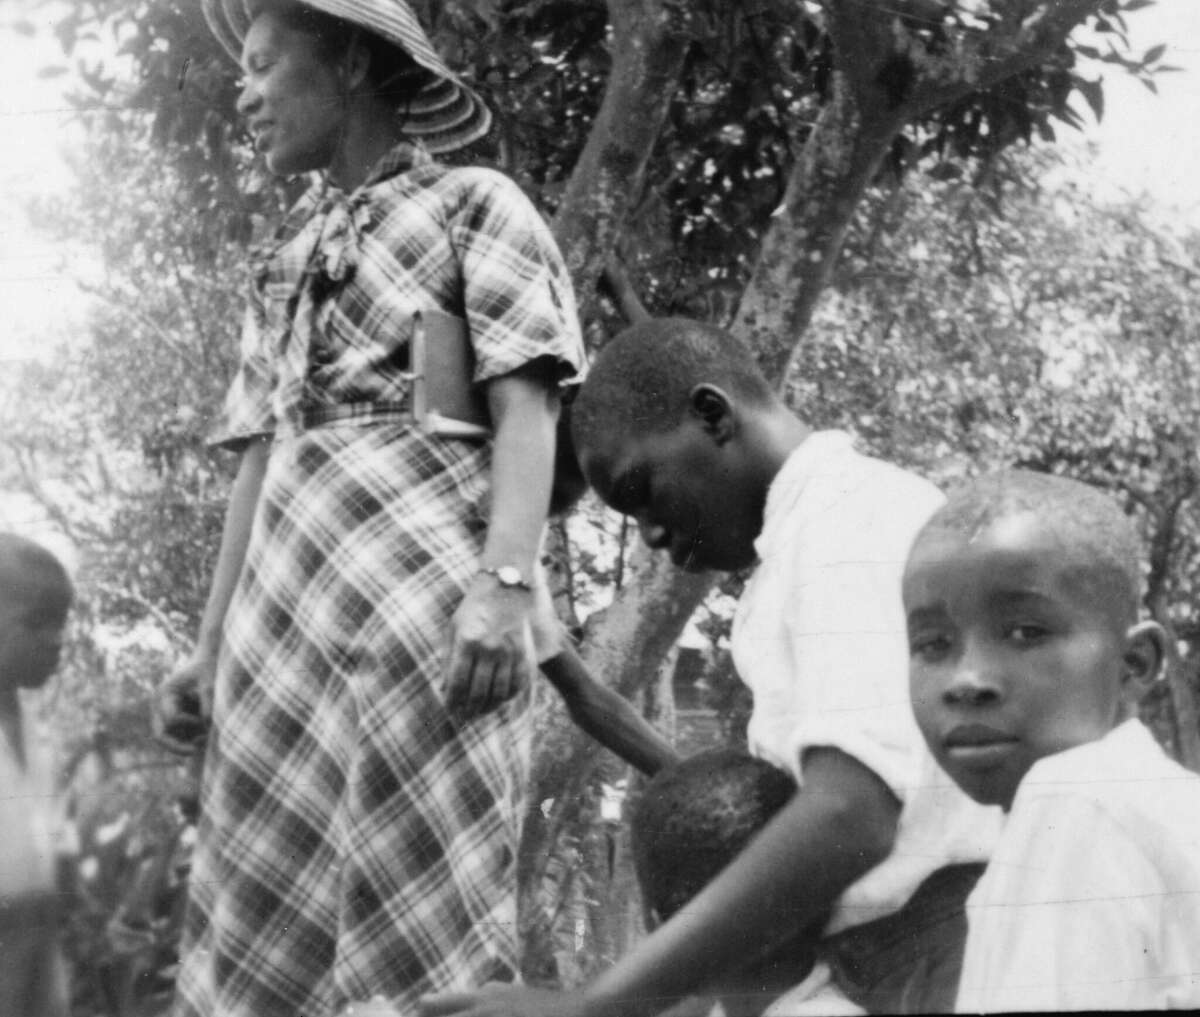 Zora Neale Hurston plays with children in Eatonville, Florida.  This photo was taken during the Lomax-Hurston-Barnicle recording expedition to Georgia, Florida, and the Bahamas.  June 1935.